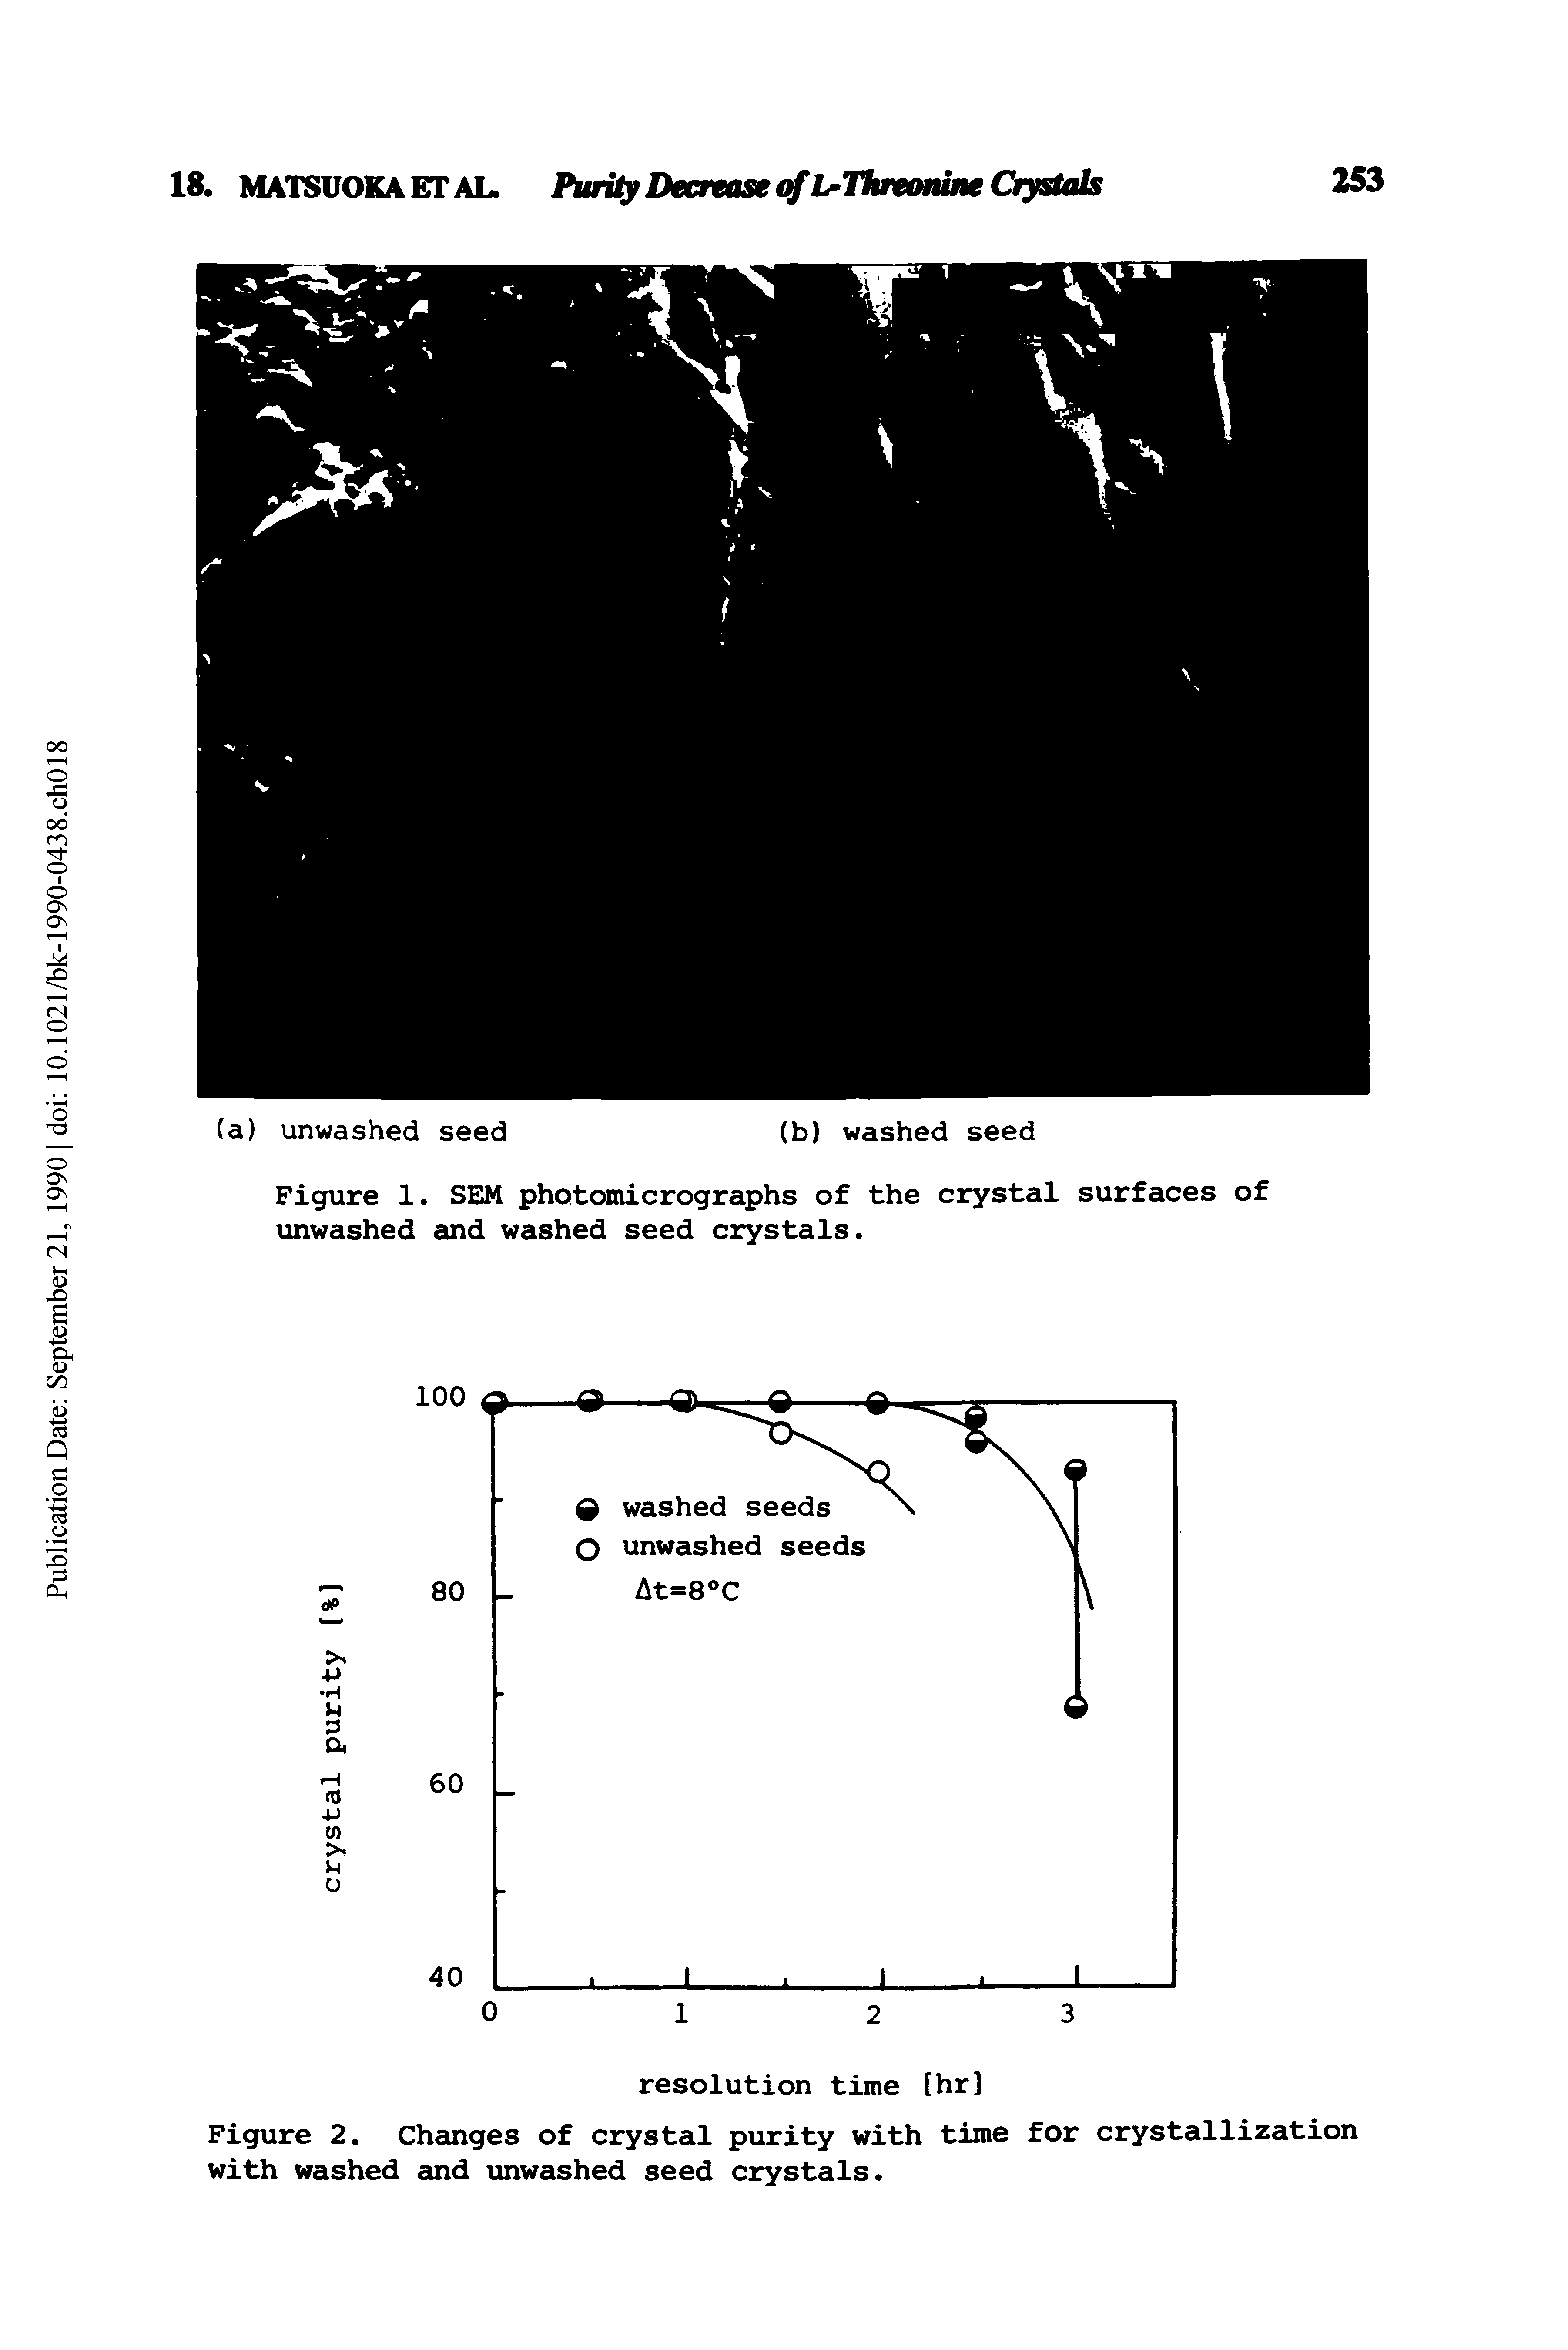 Figure 2. Changes of crystal purity with time for crystallization with washed and unwashed seed crystals.